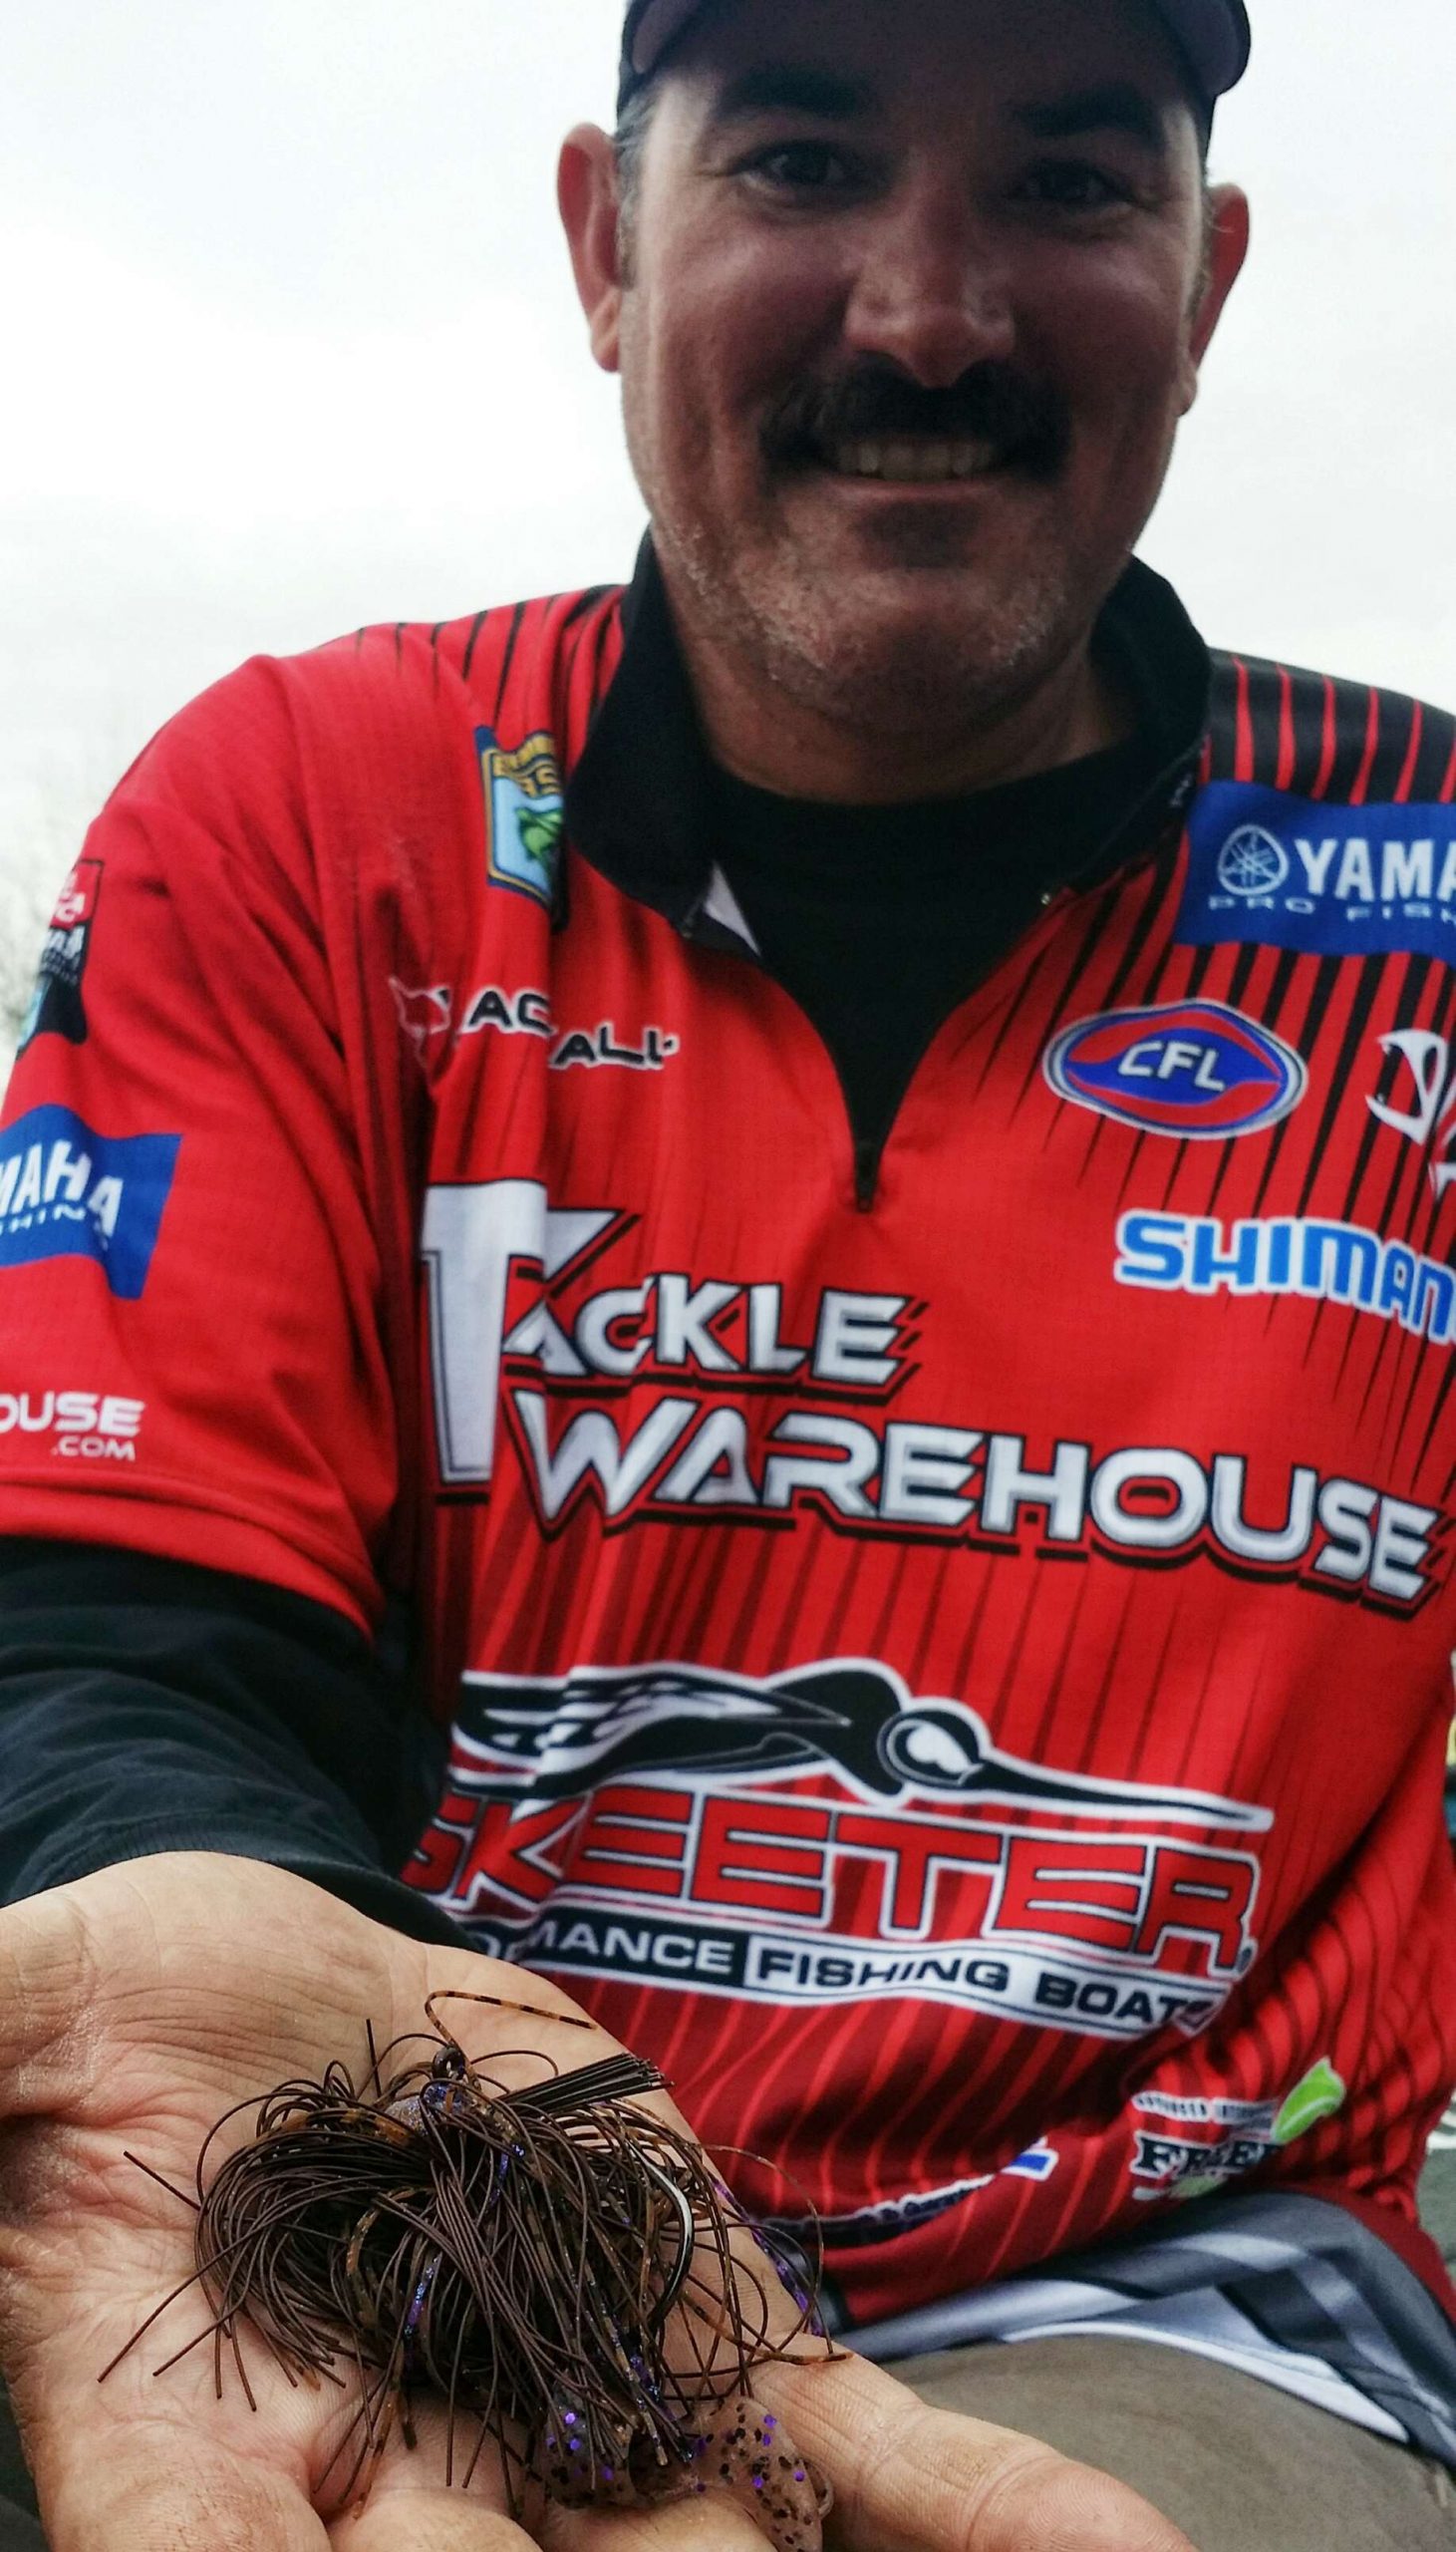 Jared Lintner weighed most of his fish on two 3/4-oz jigs: an Eco Pro Tungsten jig (for rocks) and a G Money Fooball Jig. Both were pb&j-colored with twin-tail grubs (smoke/purple flake). He explained that the tungsten jig makes a different sound when it hits rocks. His fish were in 30-40 feet in main-river creek mouths, and the key was dragging the jig until it contacted rocks or brush. When that happened, he'd shake the jig and then get bit.